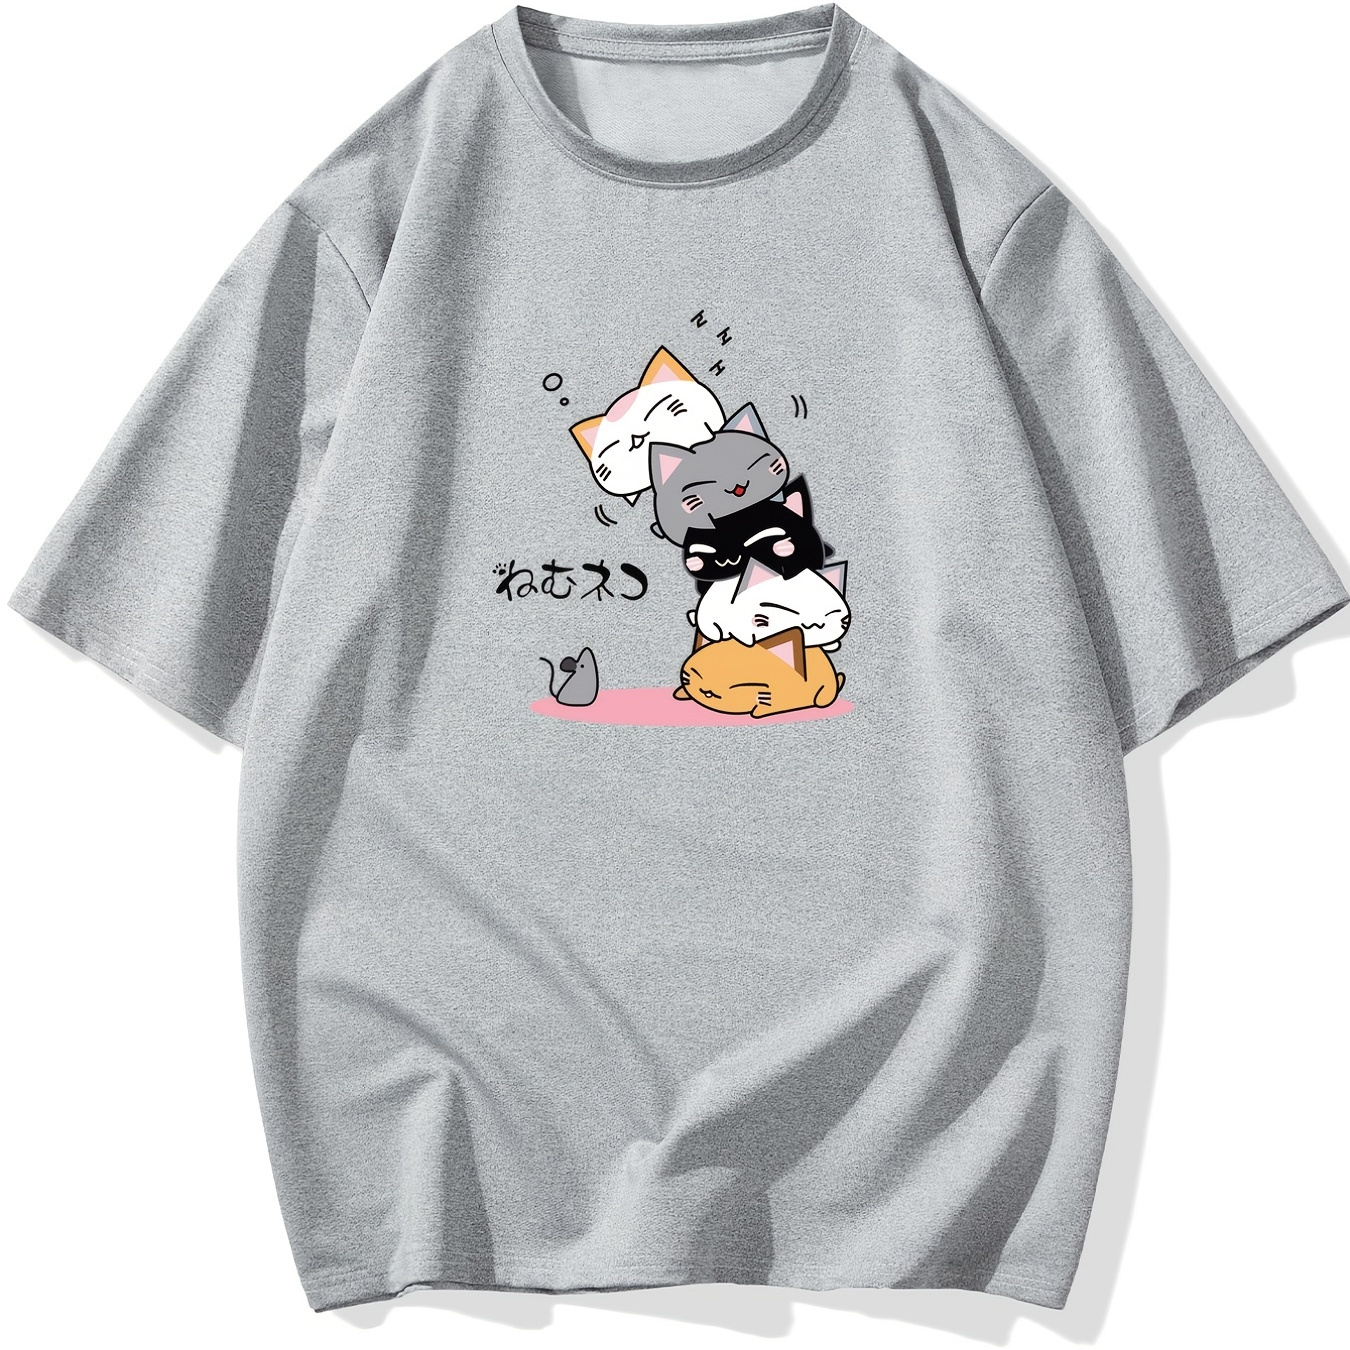 

Men's Plus Size Cute Cats Print Stretch T-shirt, Oversized Short Sleeve Tops For Spring Summer, Causal Loose Clothing For Big And Tall Guys